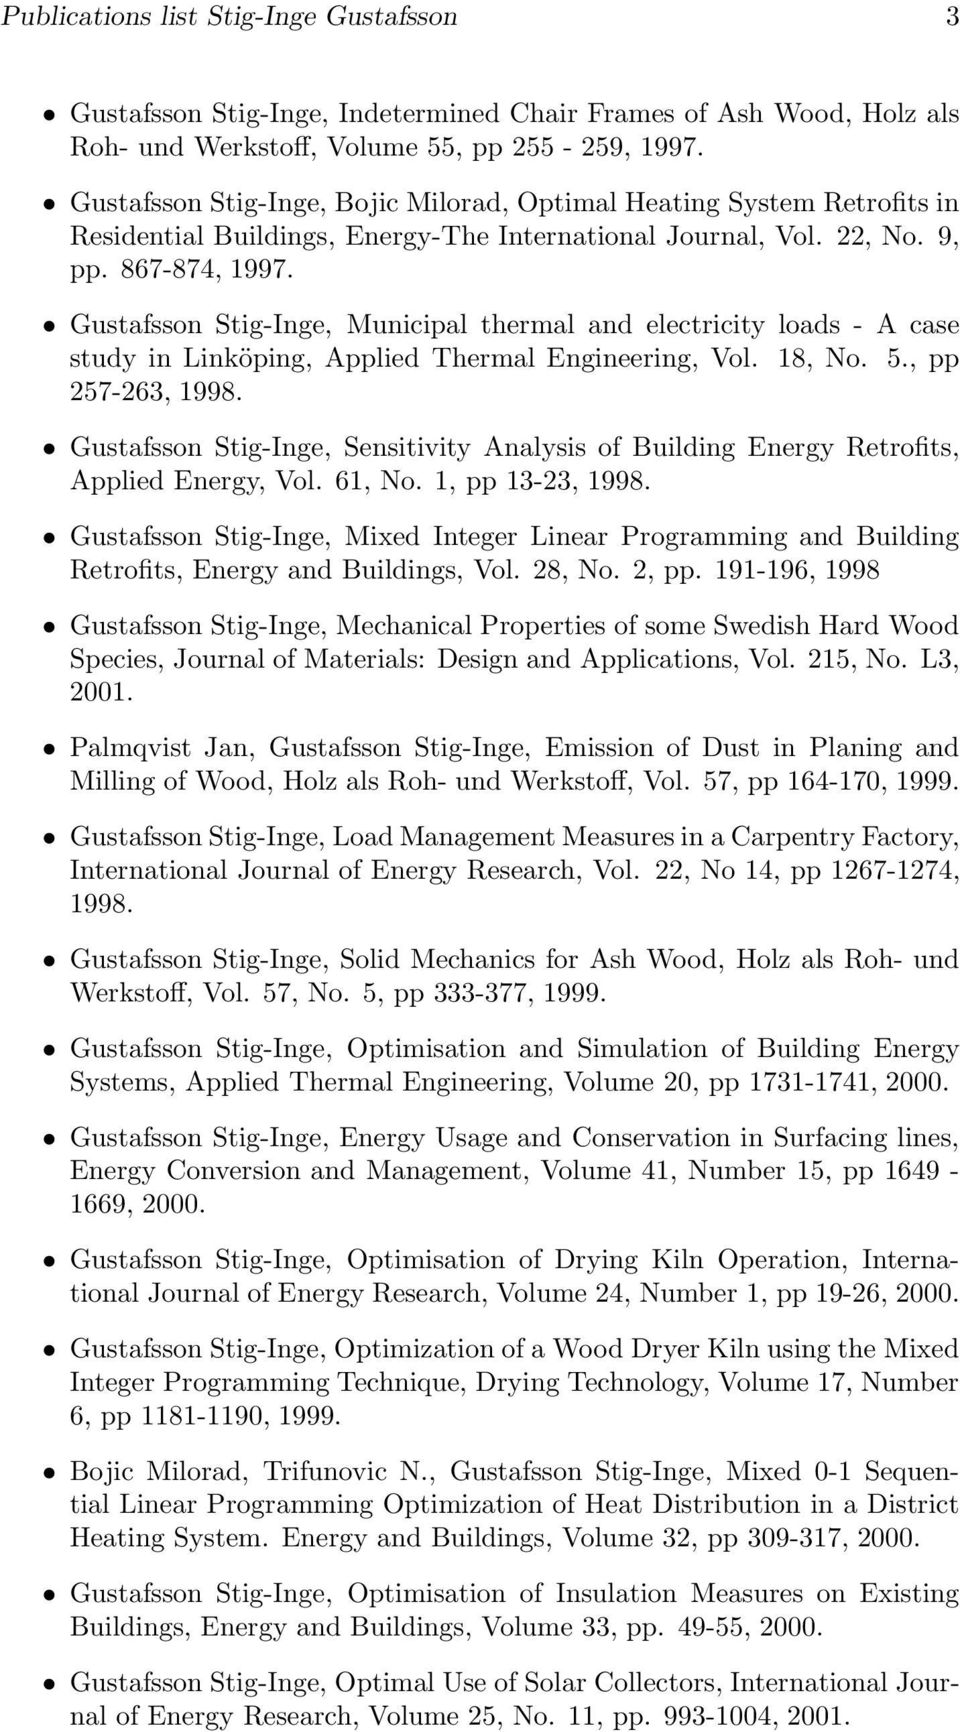 Gustafsson Stig-Inge, Municipal thermal and electricity loads - A case study in Linköping, Applied Thermal Engineering, Vol. 18, No. 5., pp 257-263, 1998.